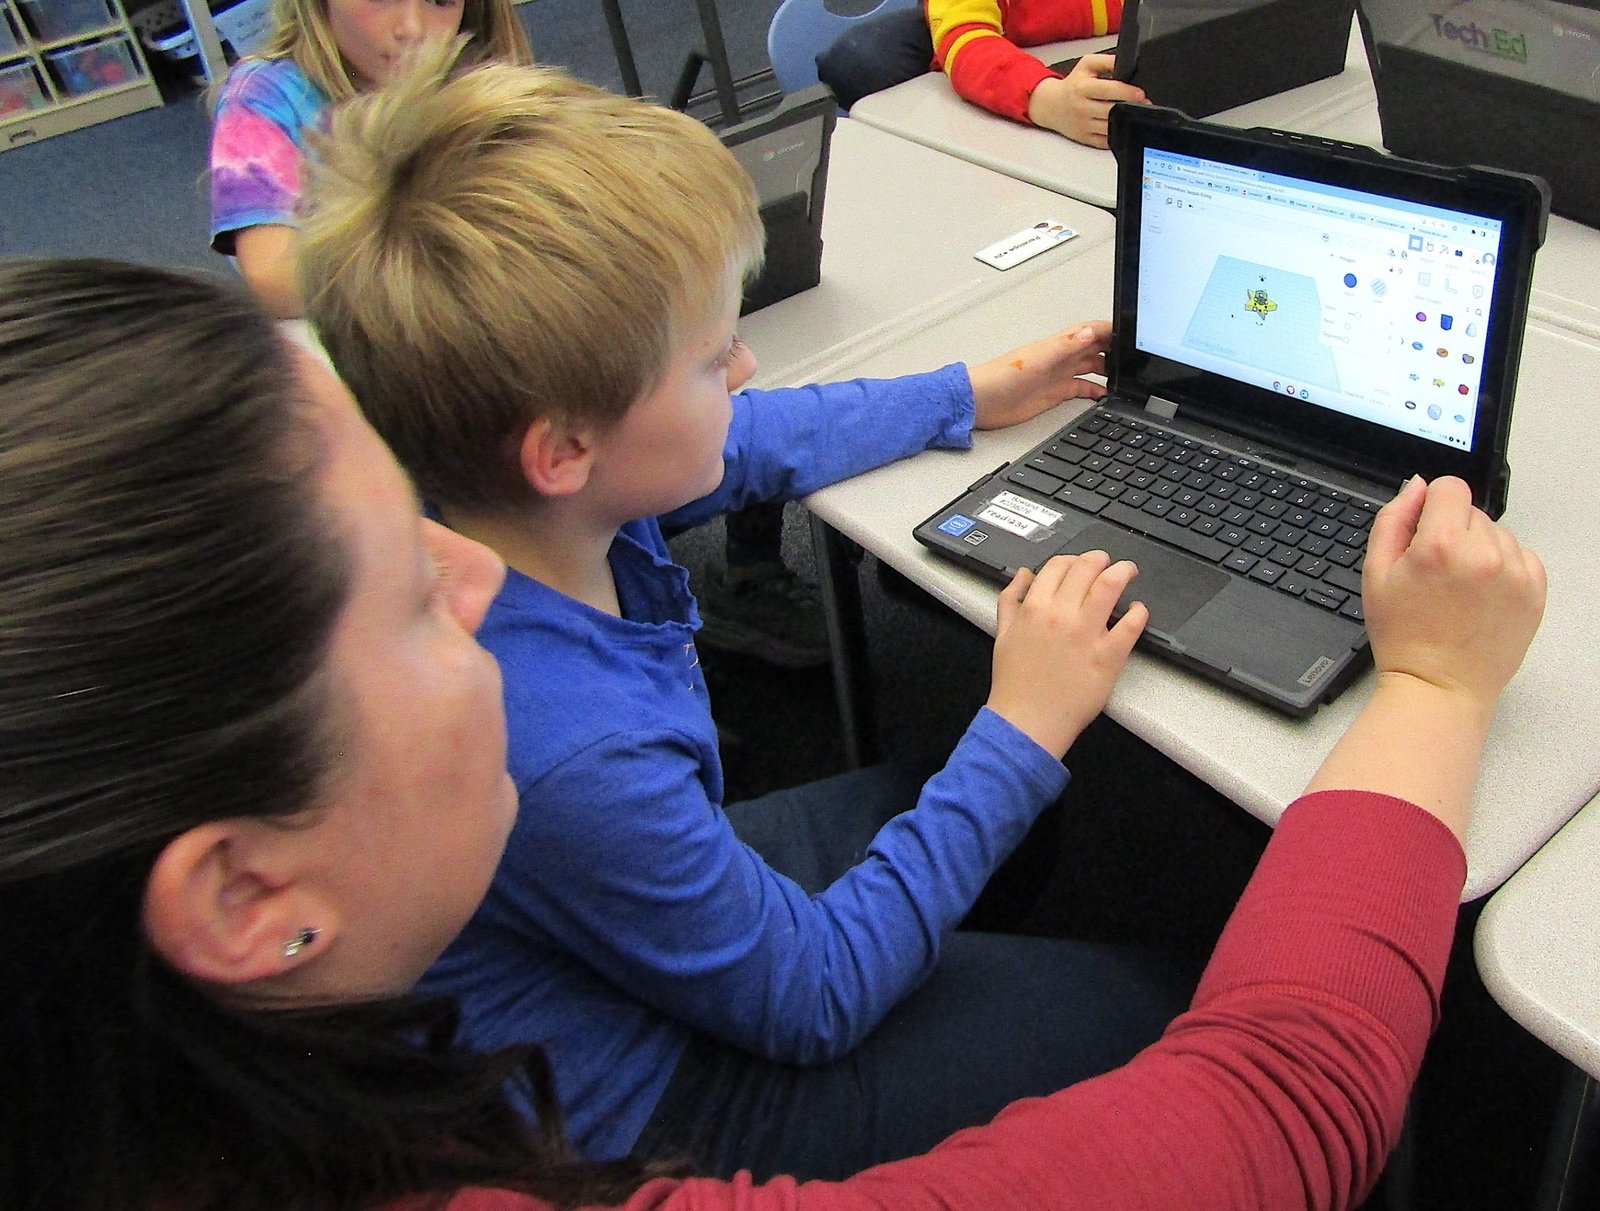 Second graders at Parmalee Elementary learn the technology to create with a 3D printer